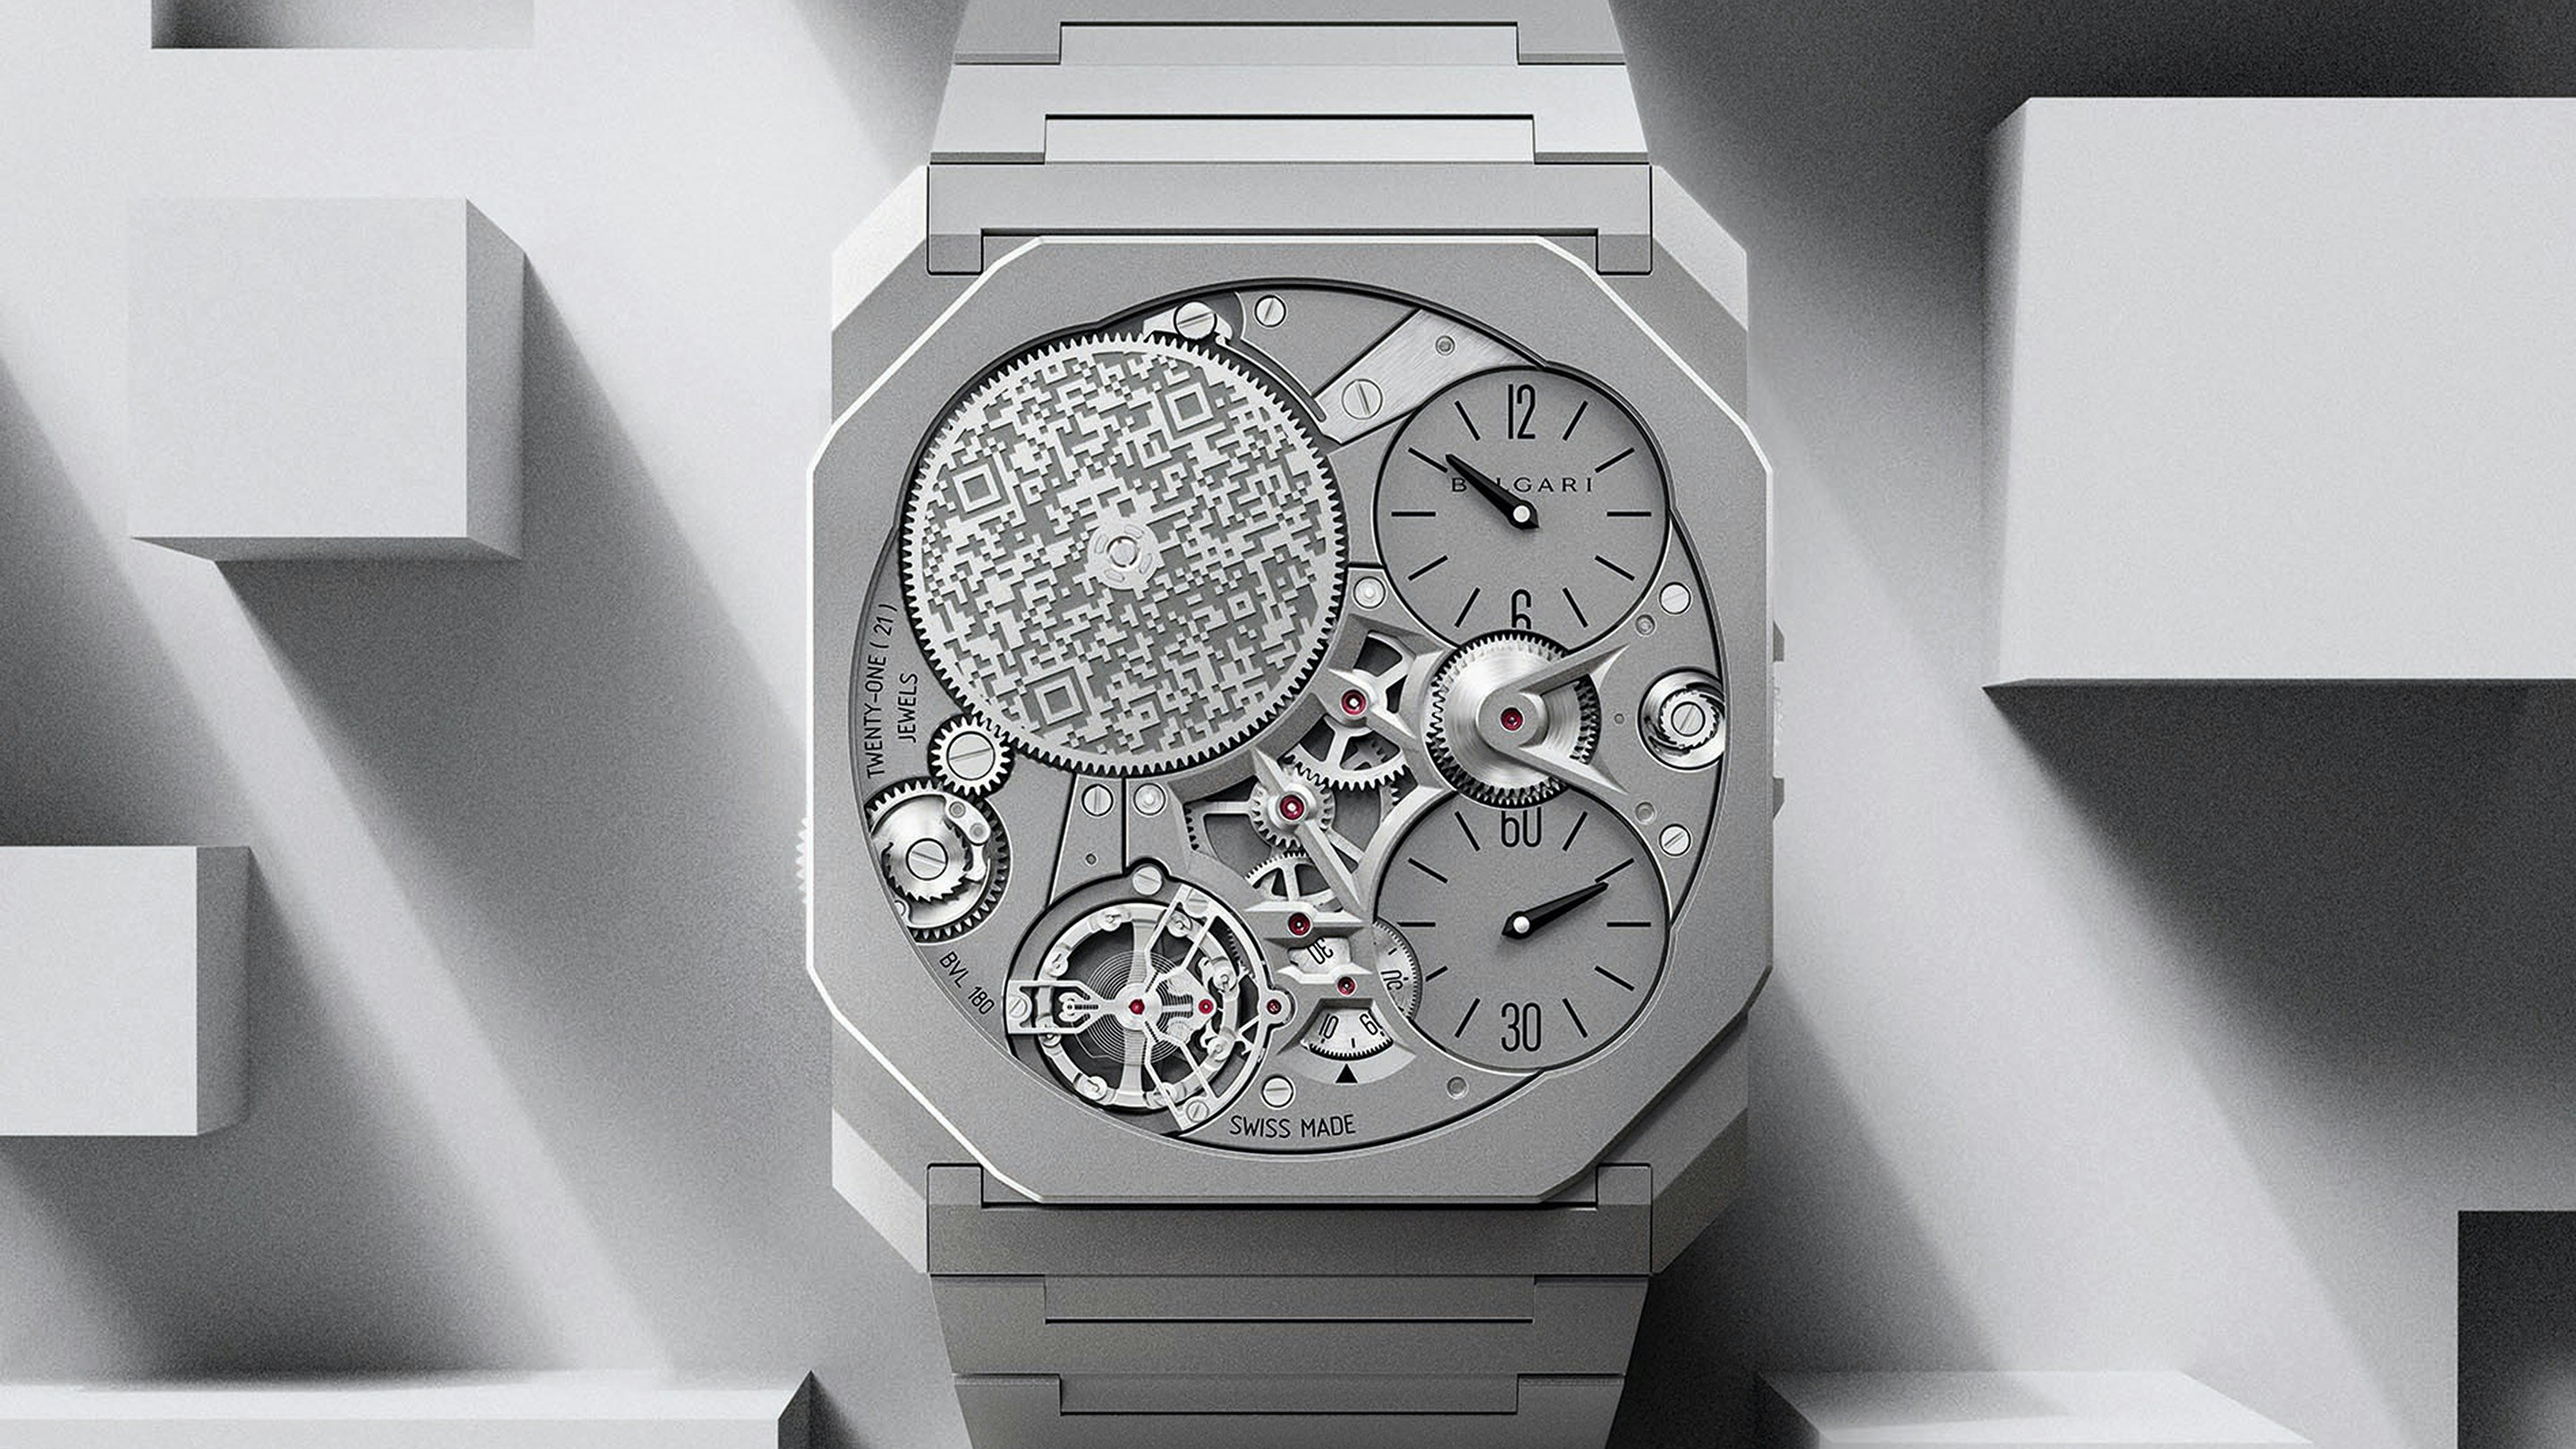 Bulgari launches the Octo Finissimo Ultra, the worlds thinnest mechanical watch